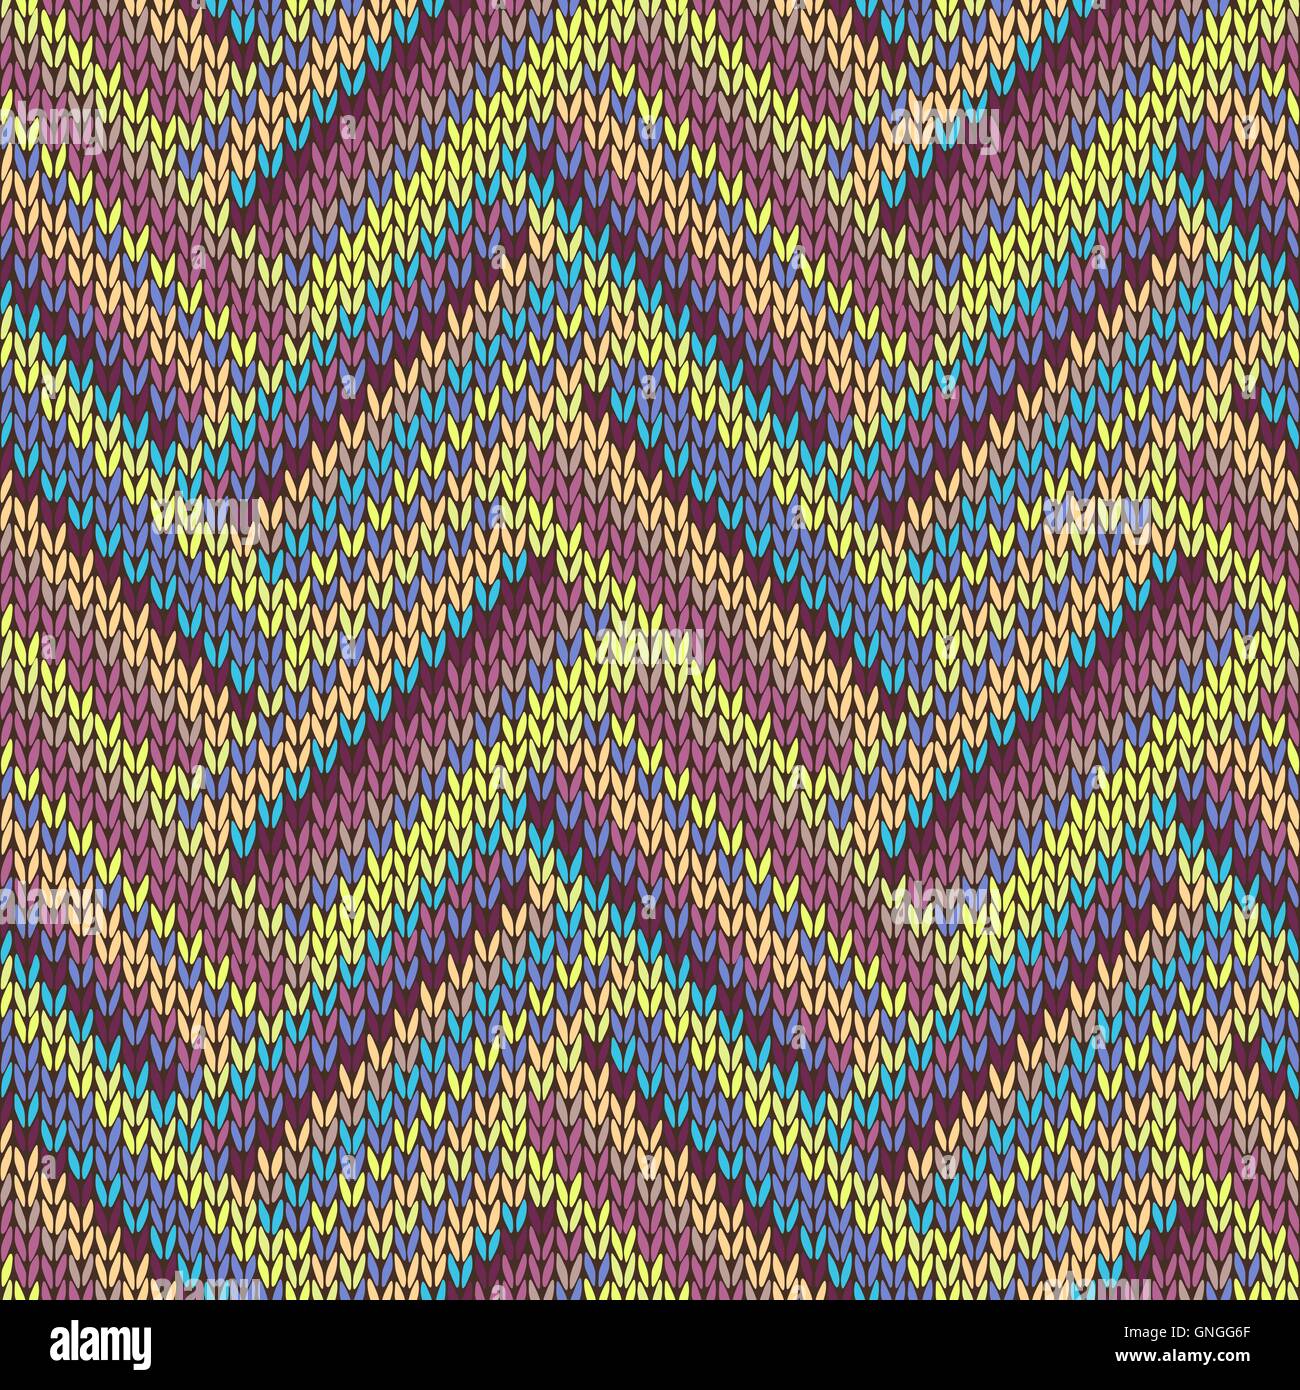 Seamless knitted pattern. Multicolored repeating tribal template. Stock Vector